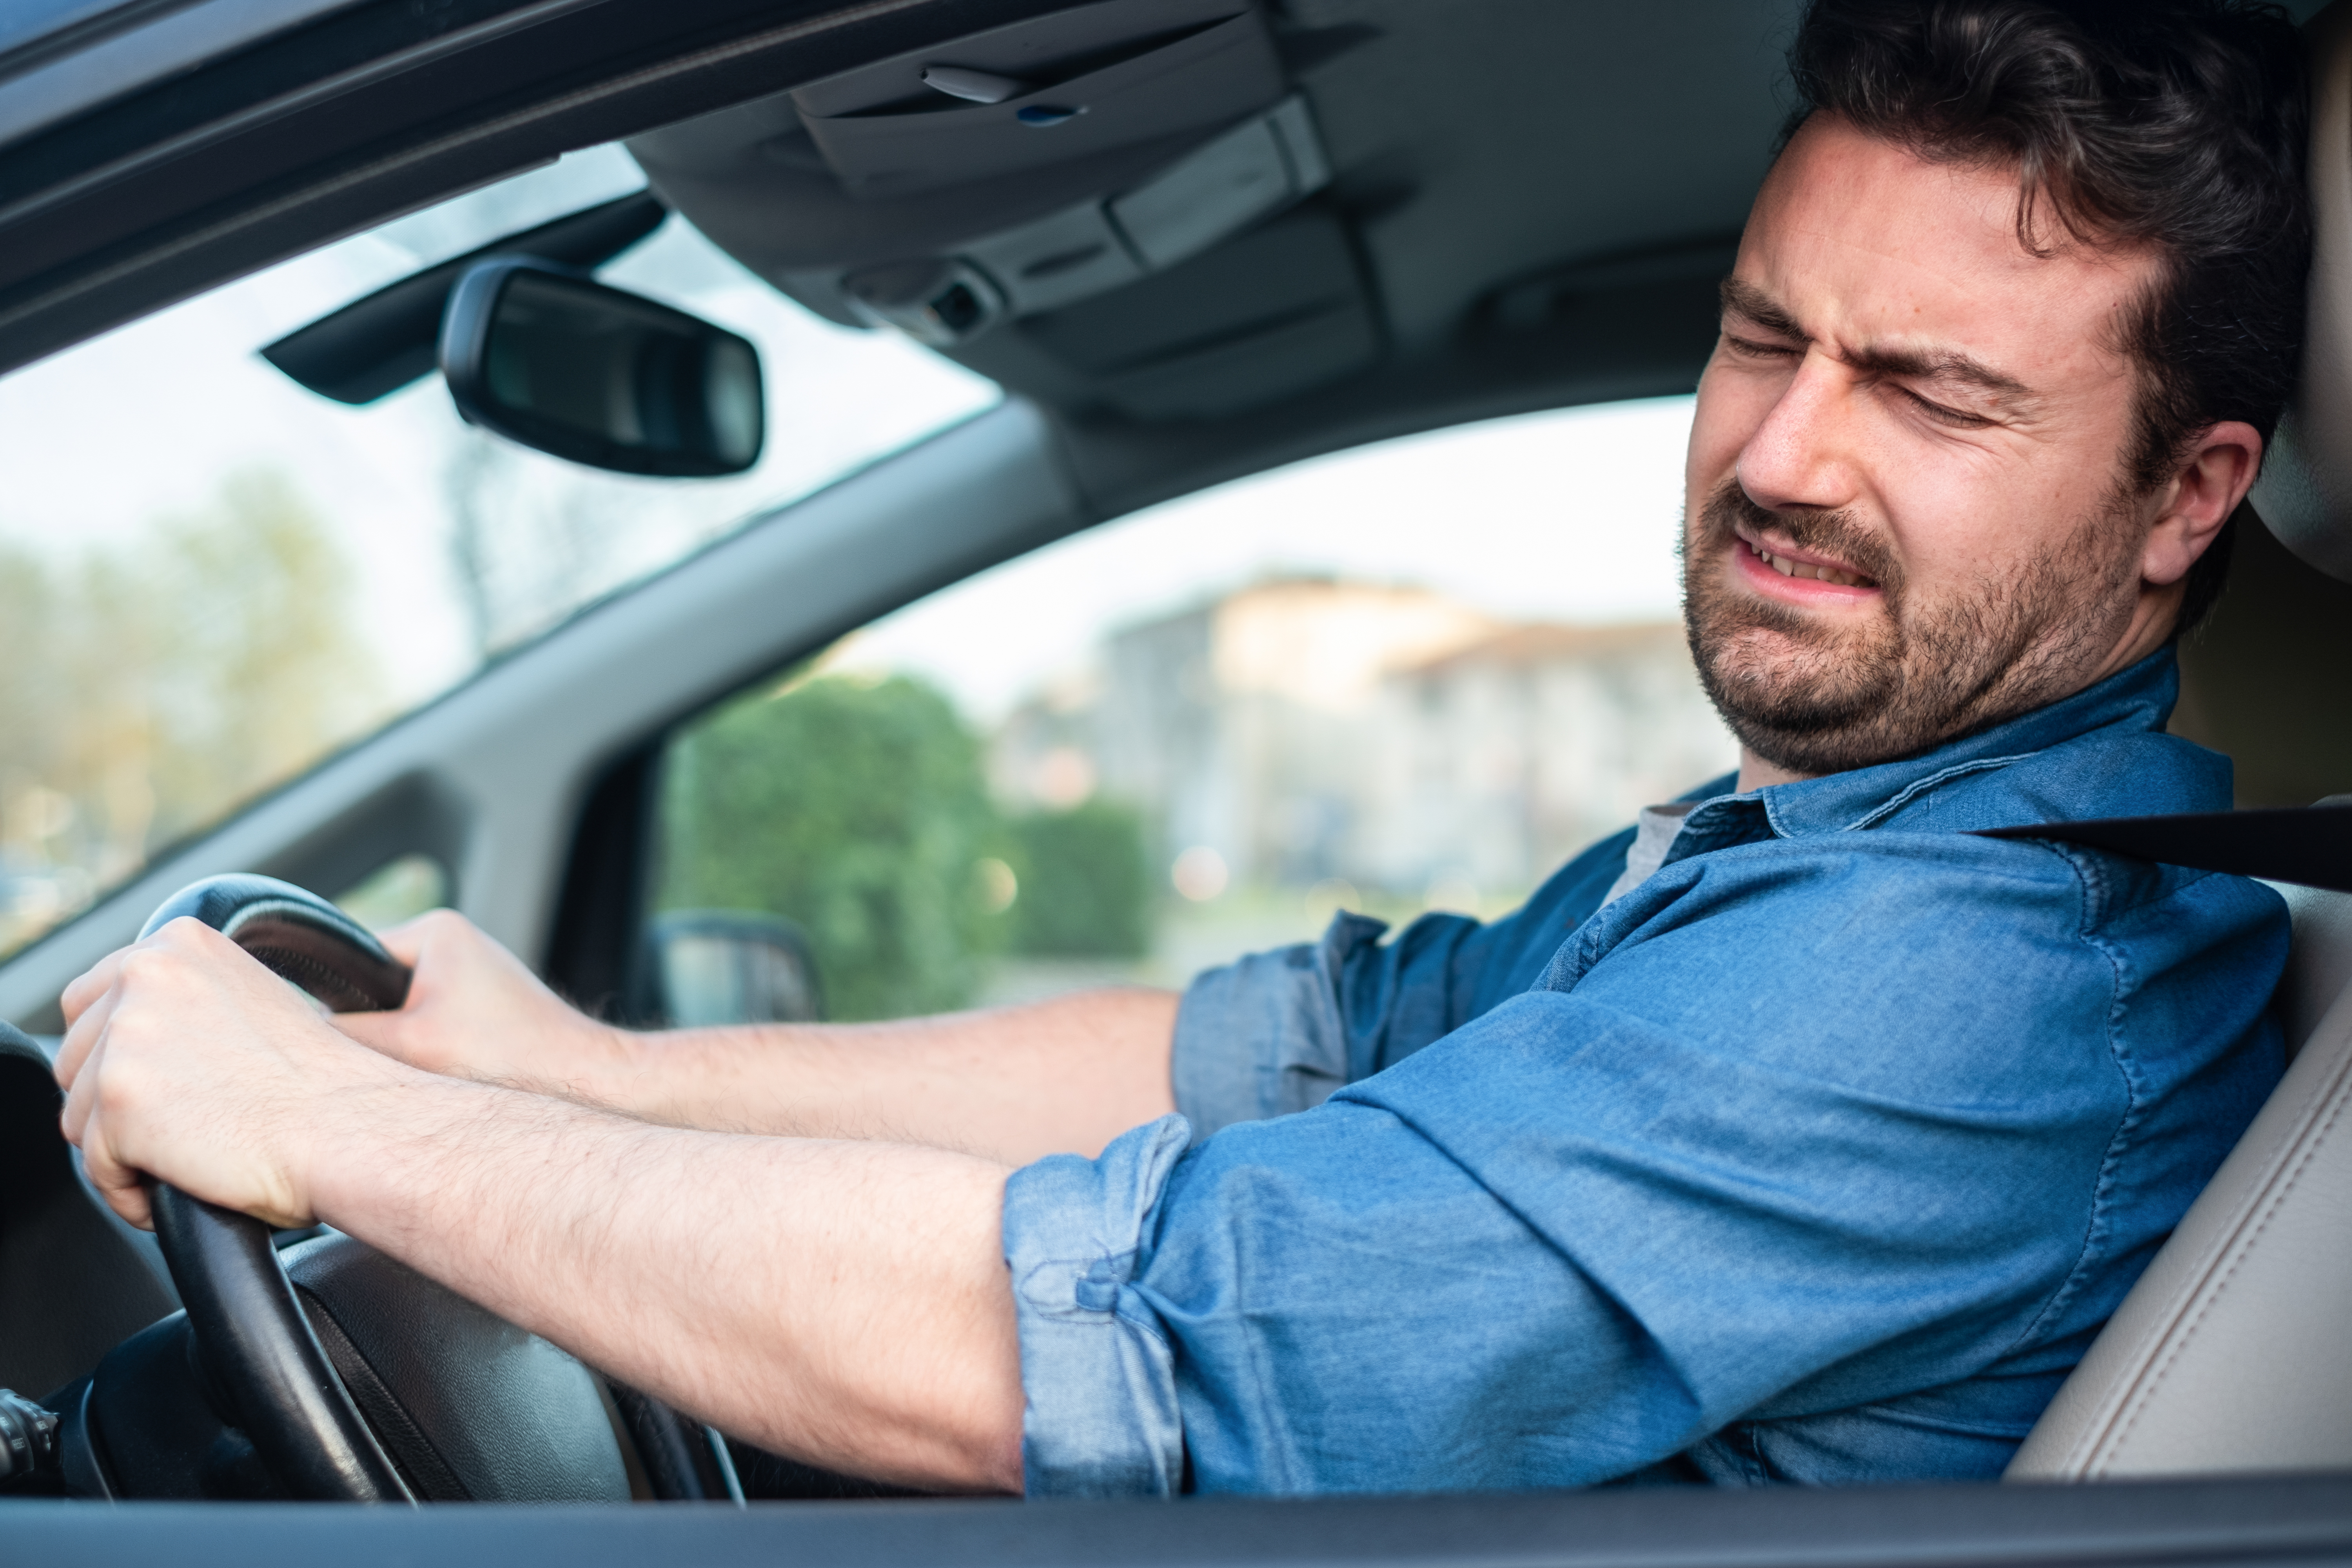 A confused man in a car | Source: Shutterstock